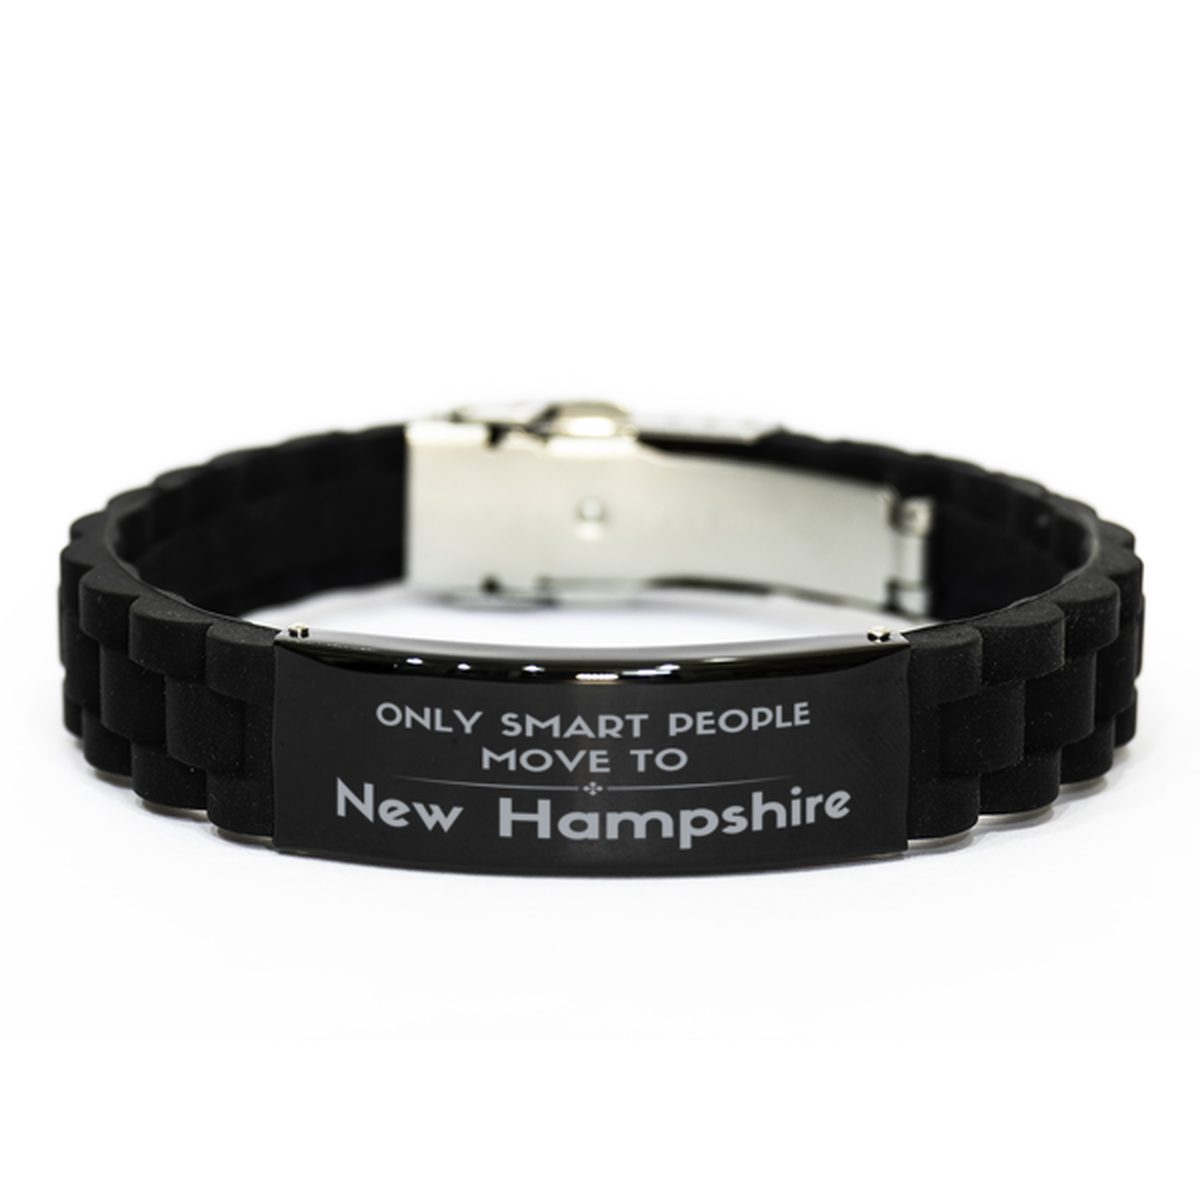 Only smart people move to New Hampshire Black Glidelock Clasp Bracelet, Gag Gifts For New Hampshire, Move to New Hampshire Gifts for Friends Coworker Funny Saying Quote